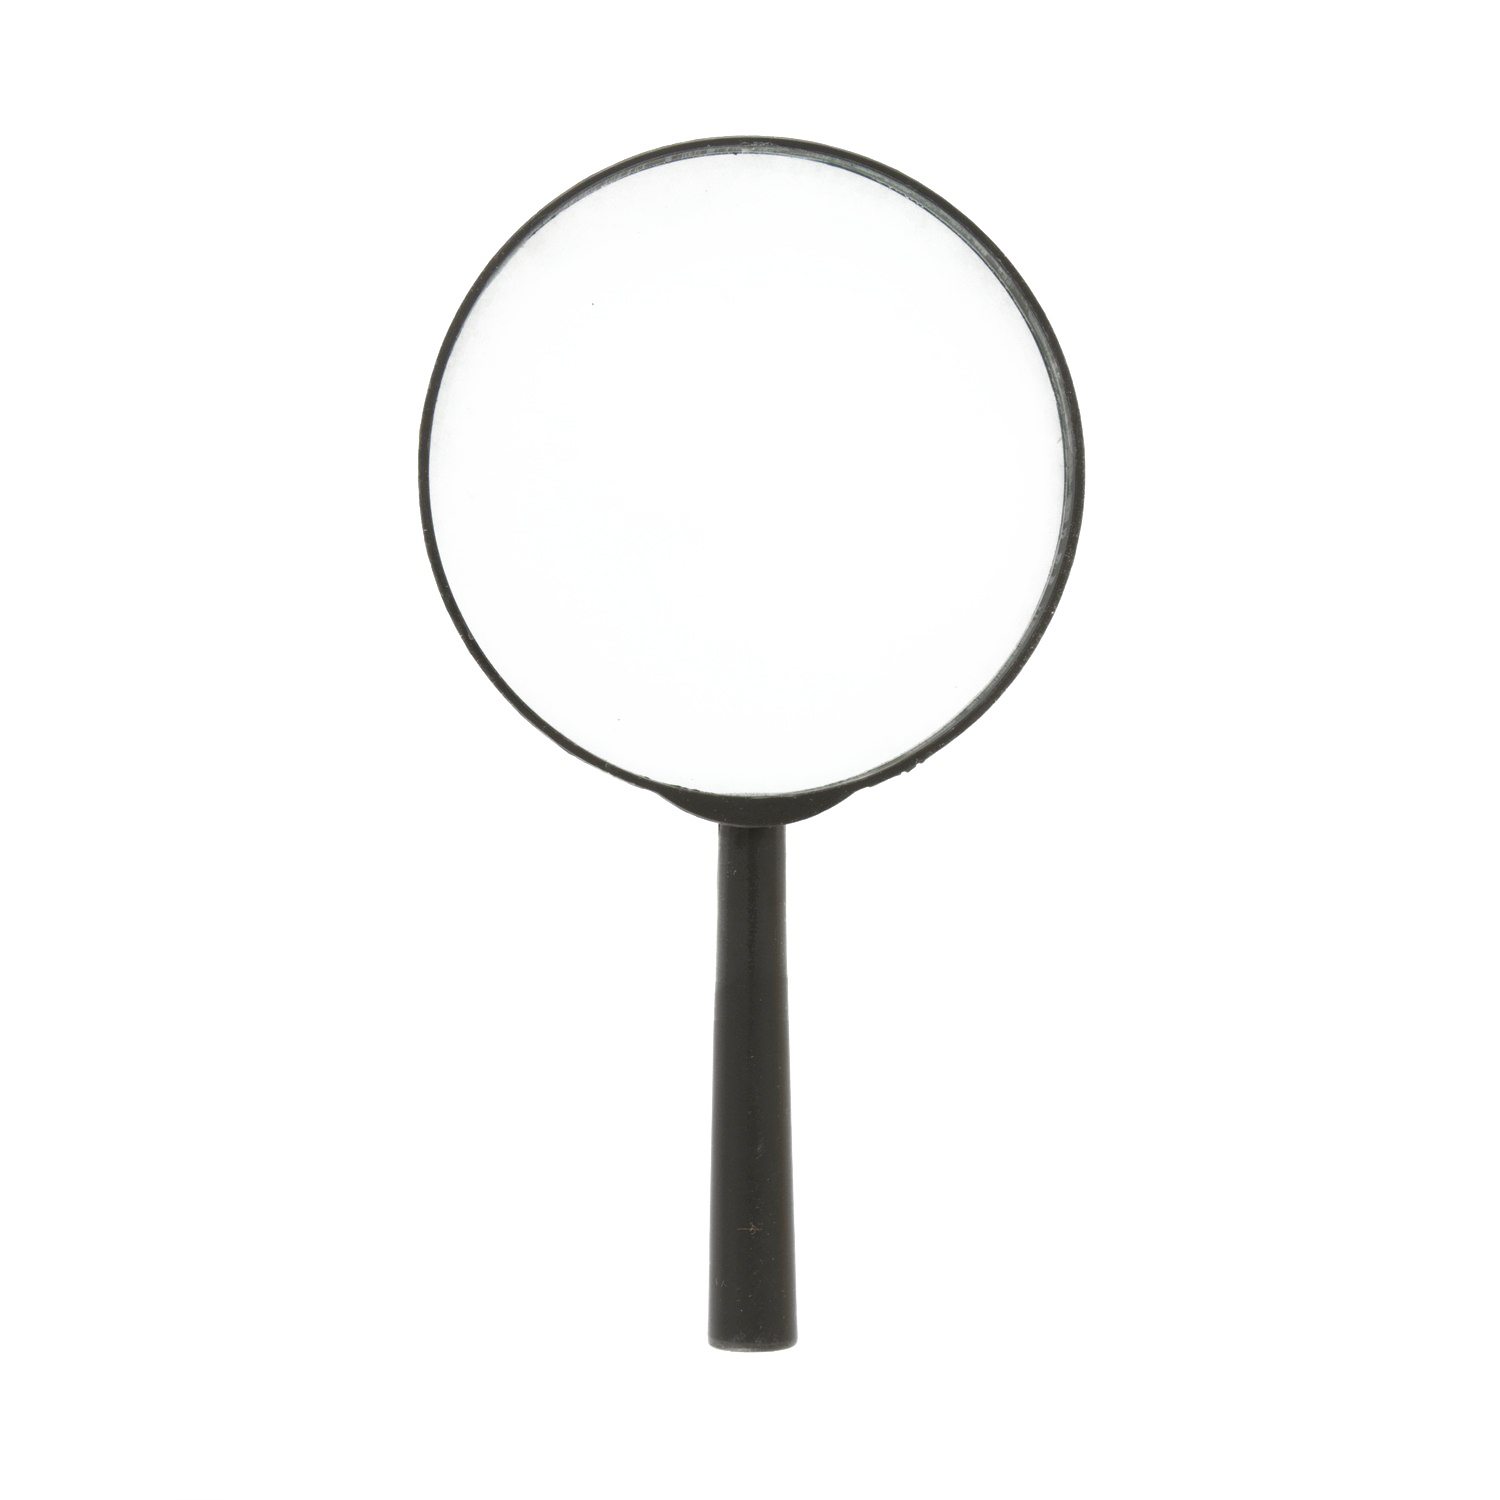 A Black Circle With A Handle